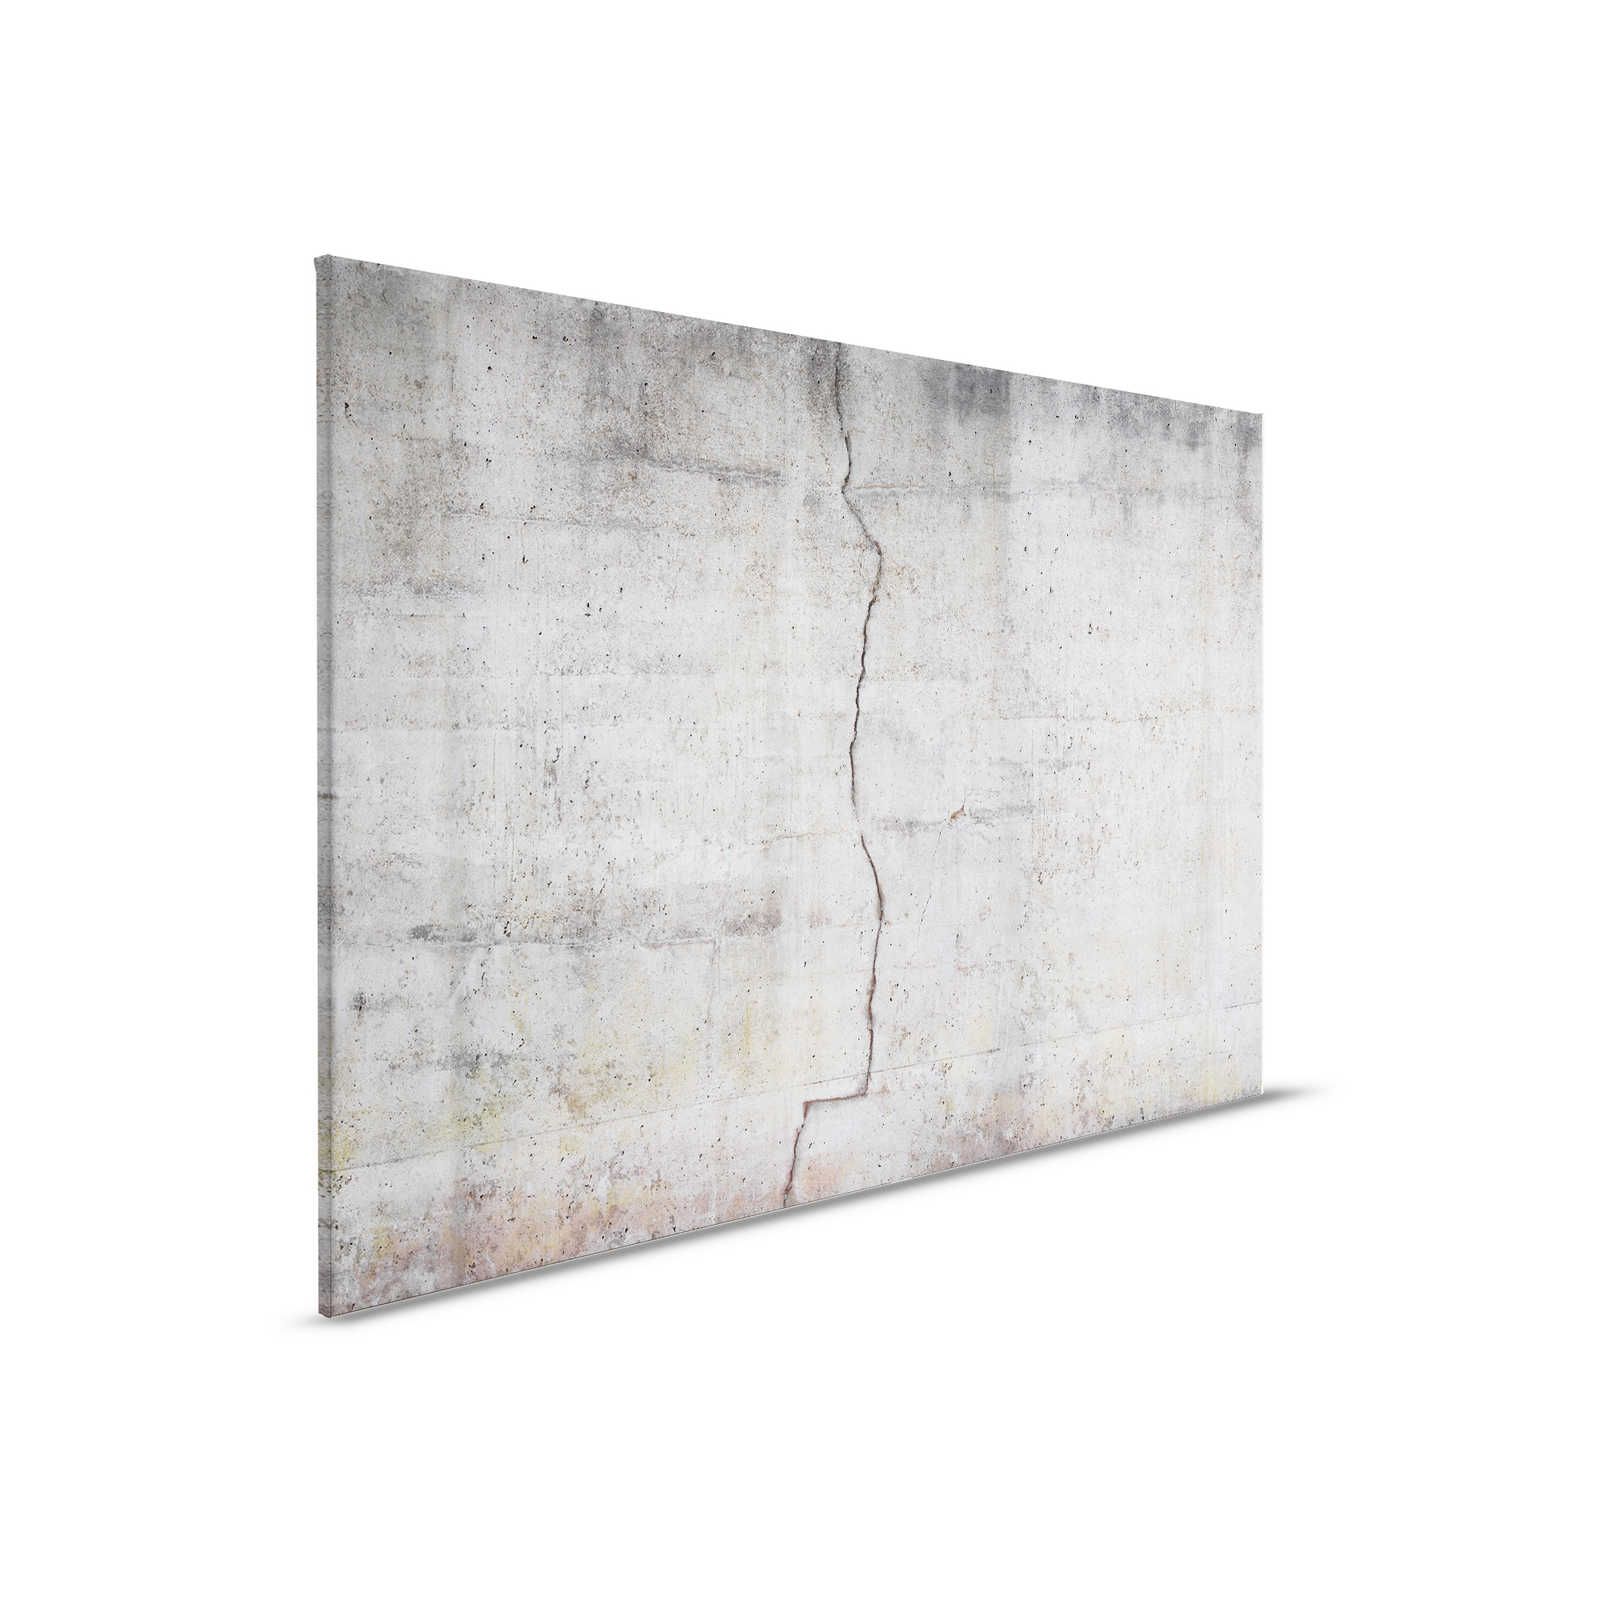         Canvas painting Concrete Wall Optics with Crack - 0,90 m x 0,60 m
    